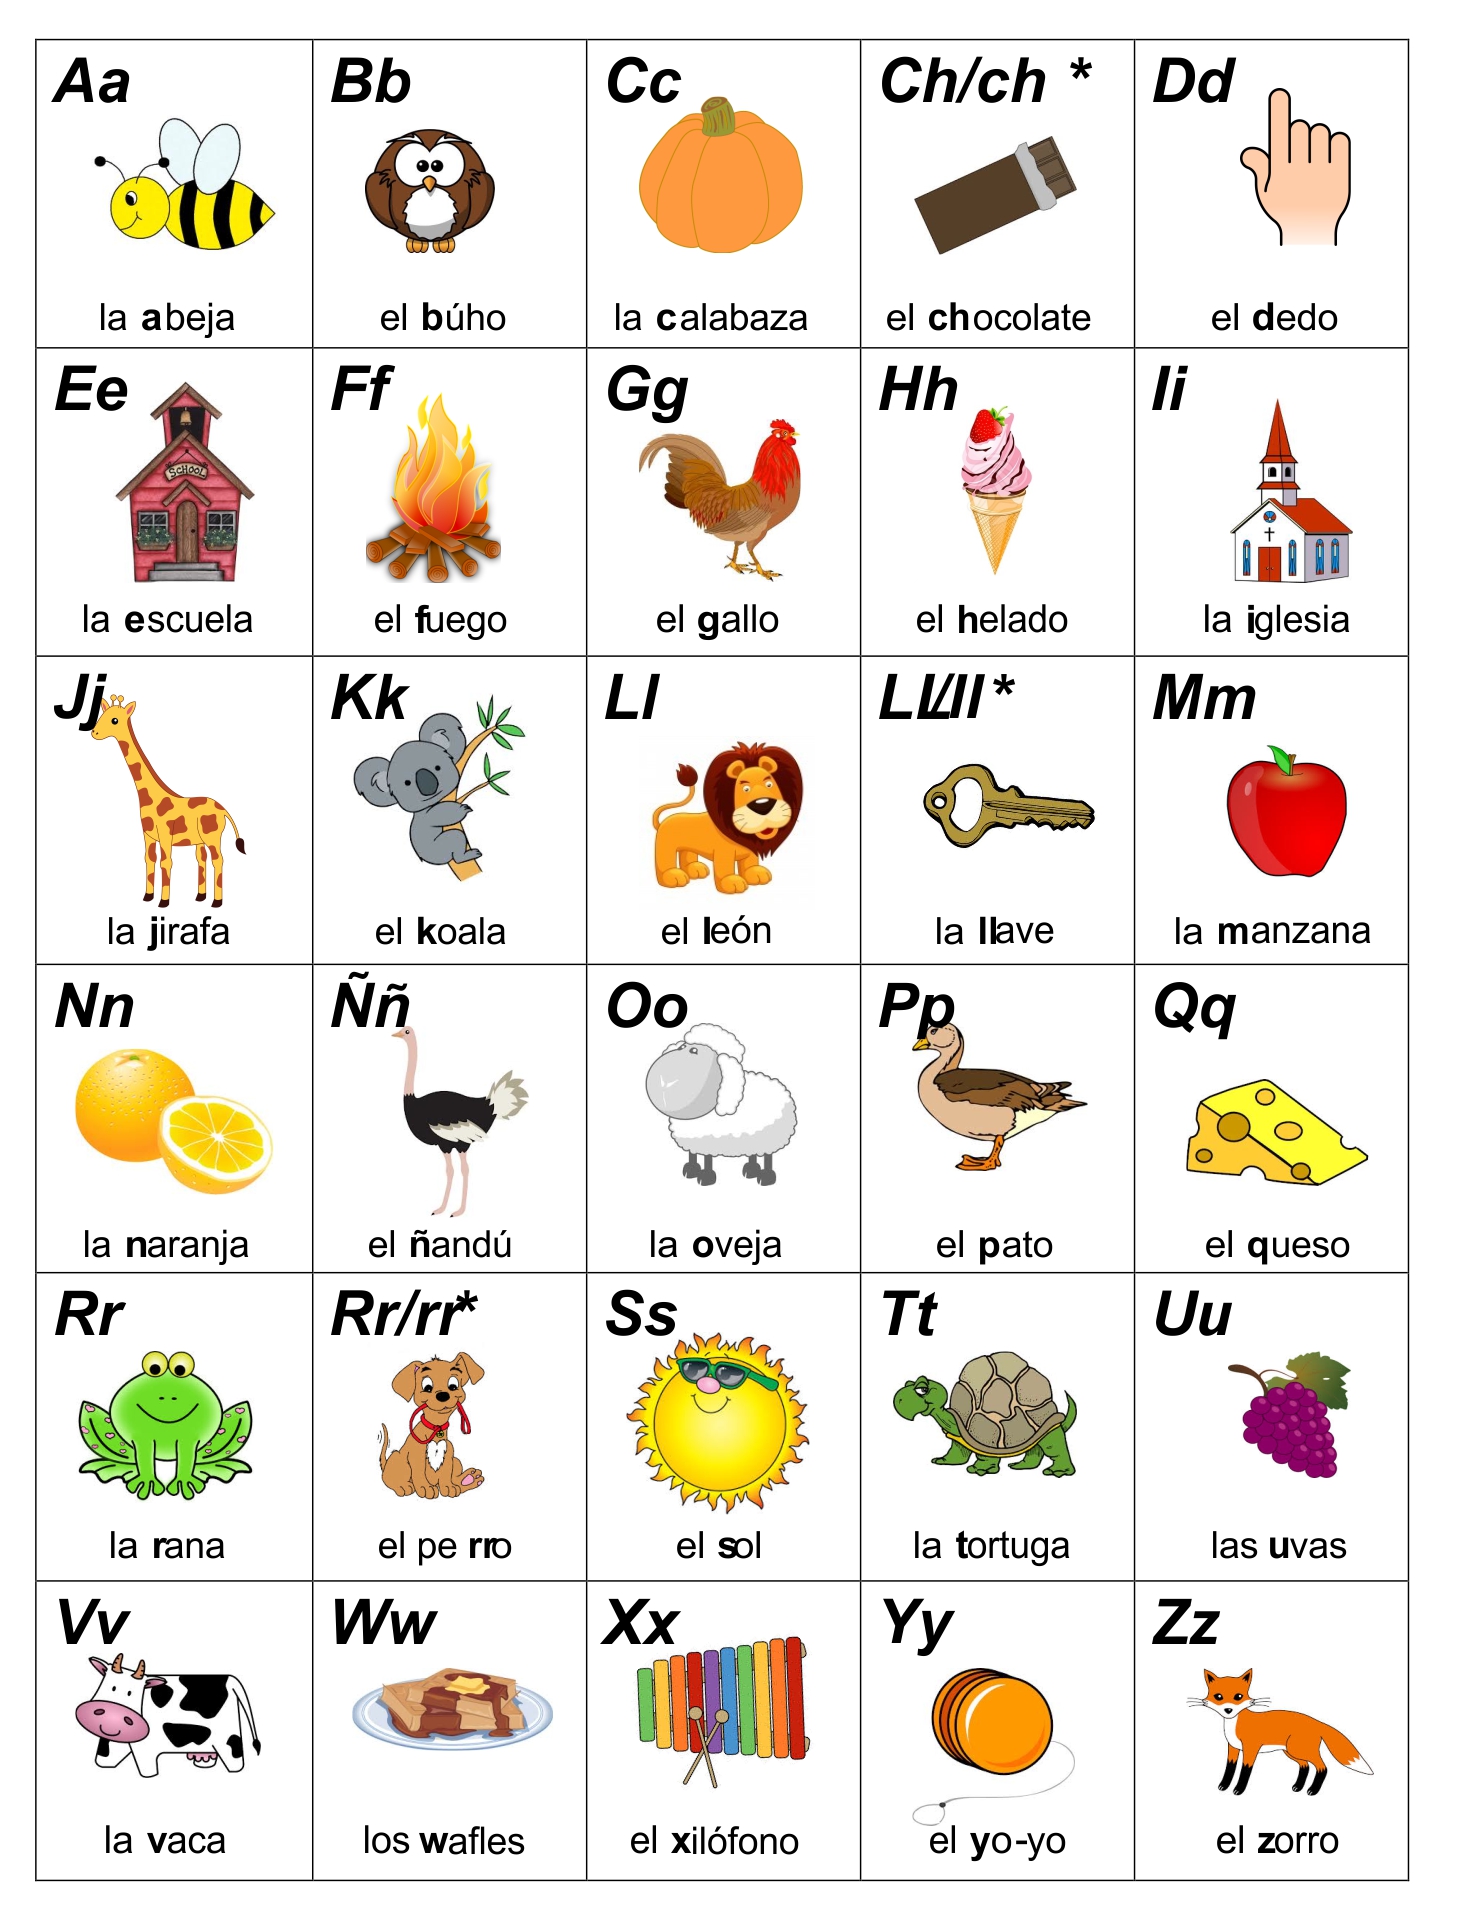 i-alphabet-in-spanish-as-in-english-the-spanish-alphabet-contains-5